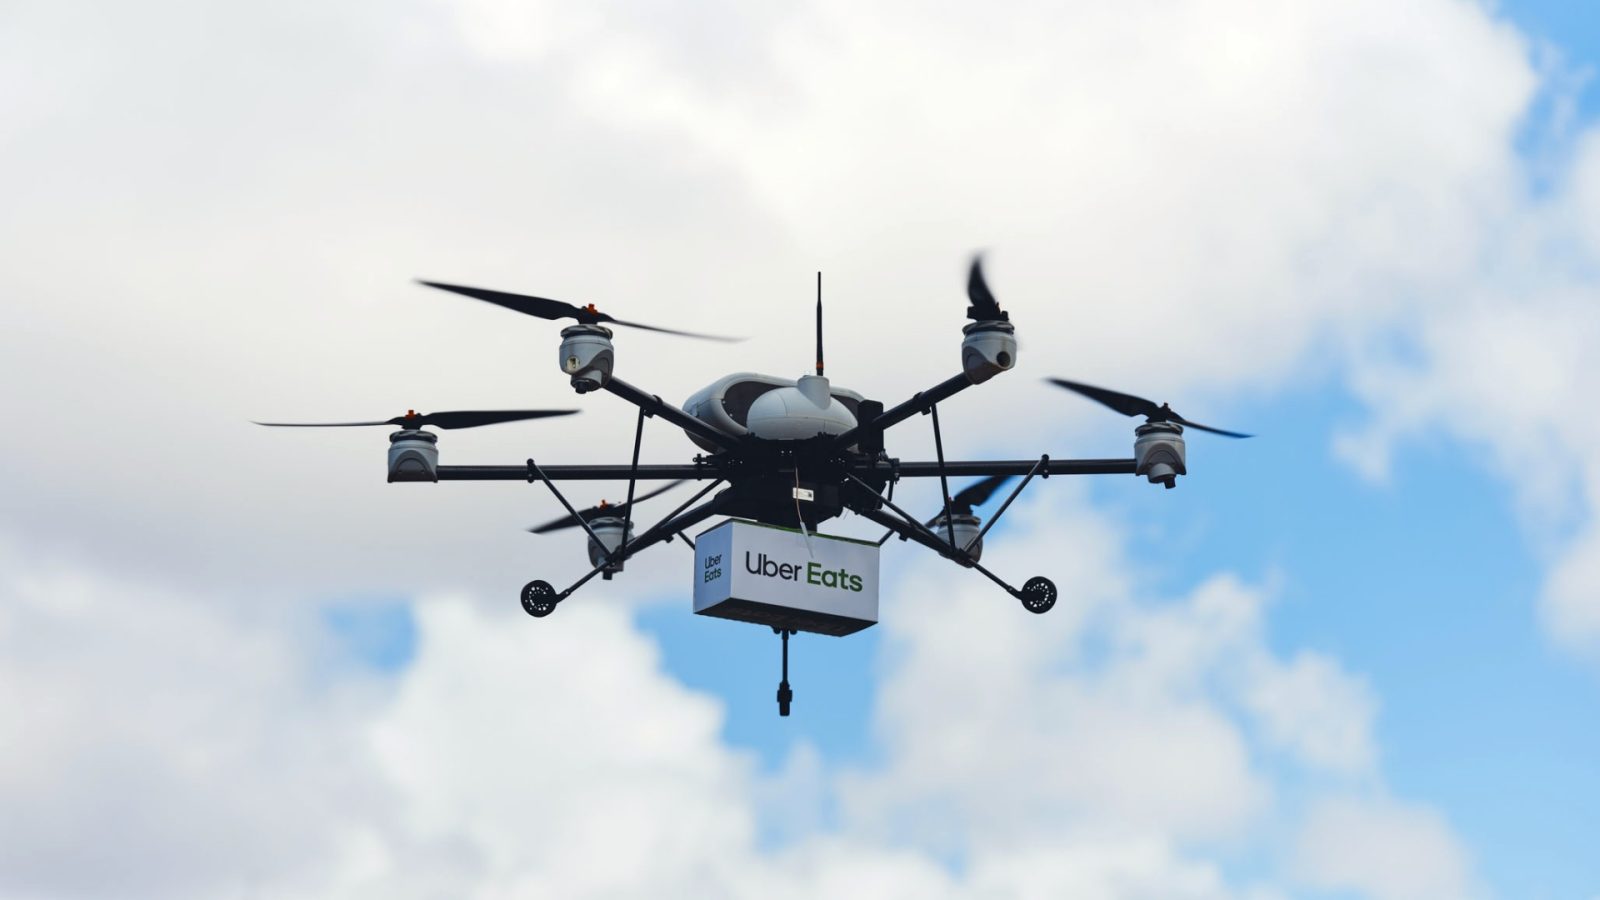 Uber plans to deliver fast food by drone starting this summer